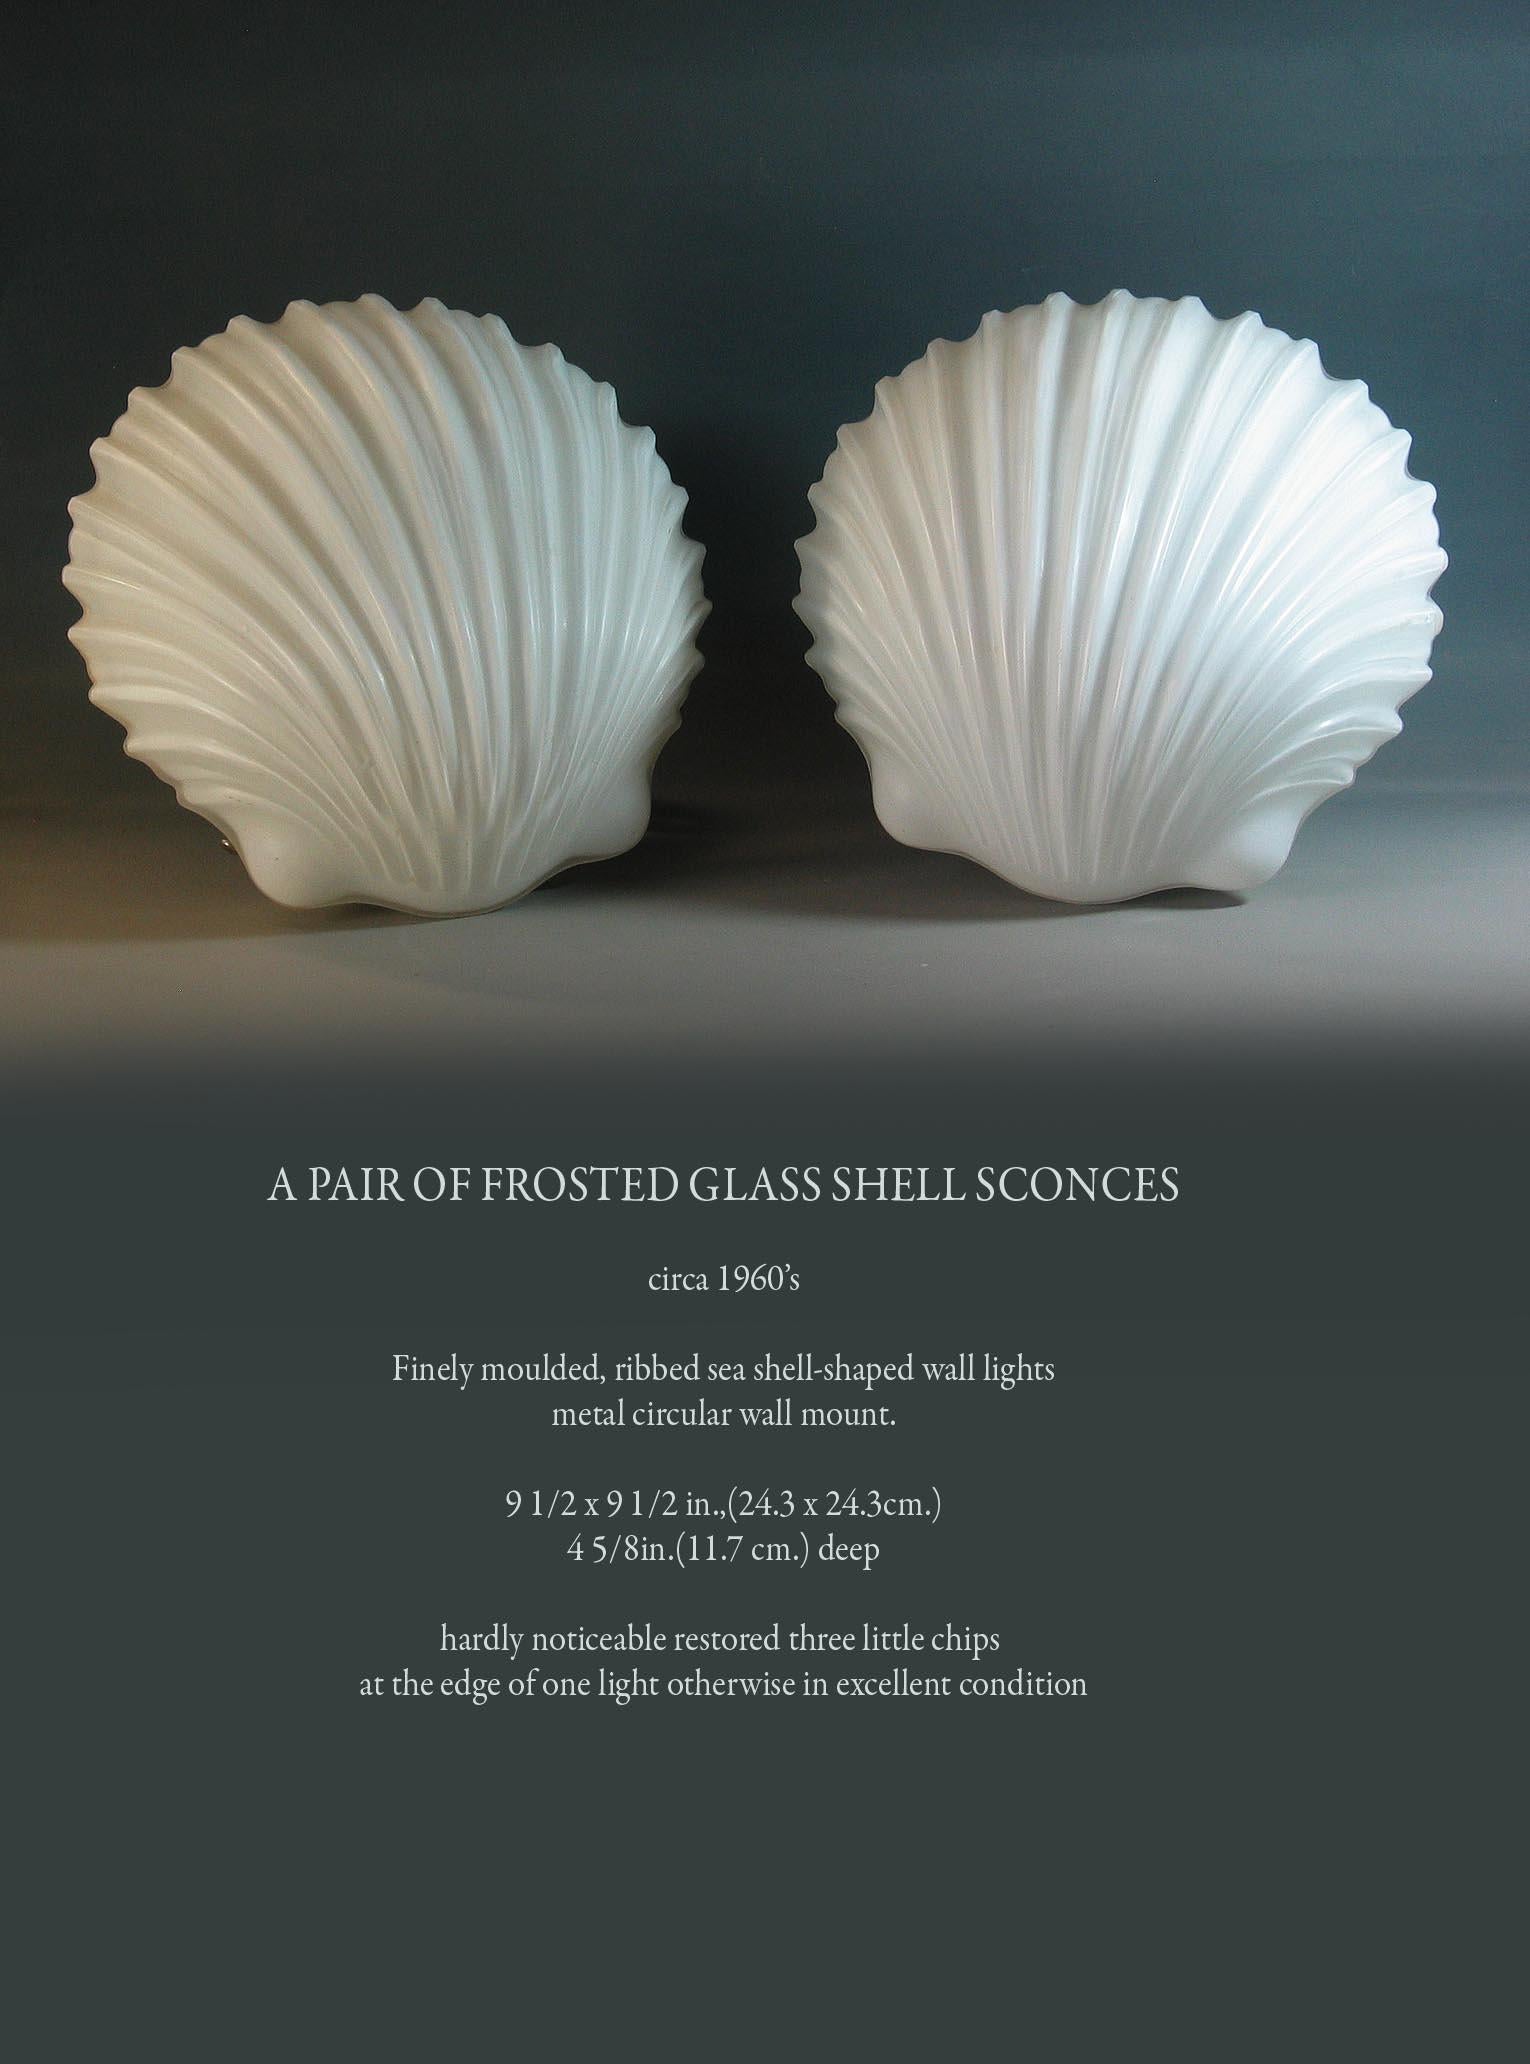 A pair of frosted glass shell wall sconces,
circa 1960s.

Finely moulded, ribbed sea shell-shaped wall lights
metal circular wall mount.

Measures: 9 1/2 x 9 1/2 in., (24.3 x 24.3 cm.)
4 5/8in. (11.7 cm.) deep.

Hardly noticeable restored three